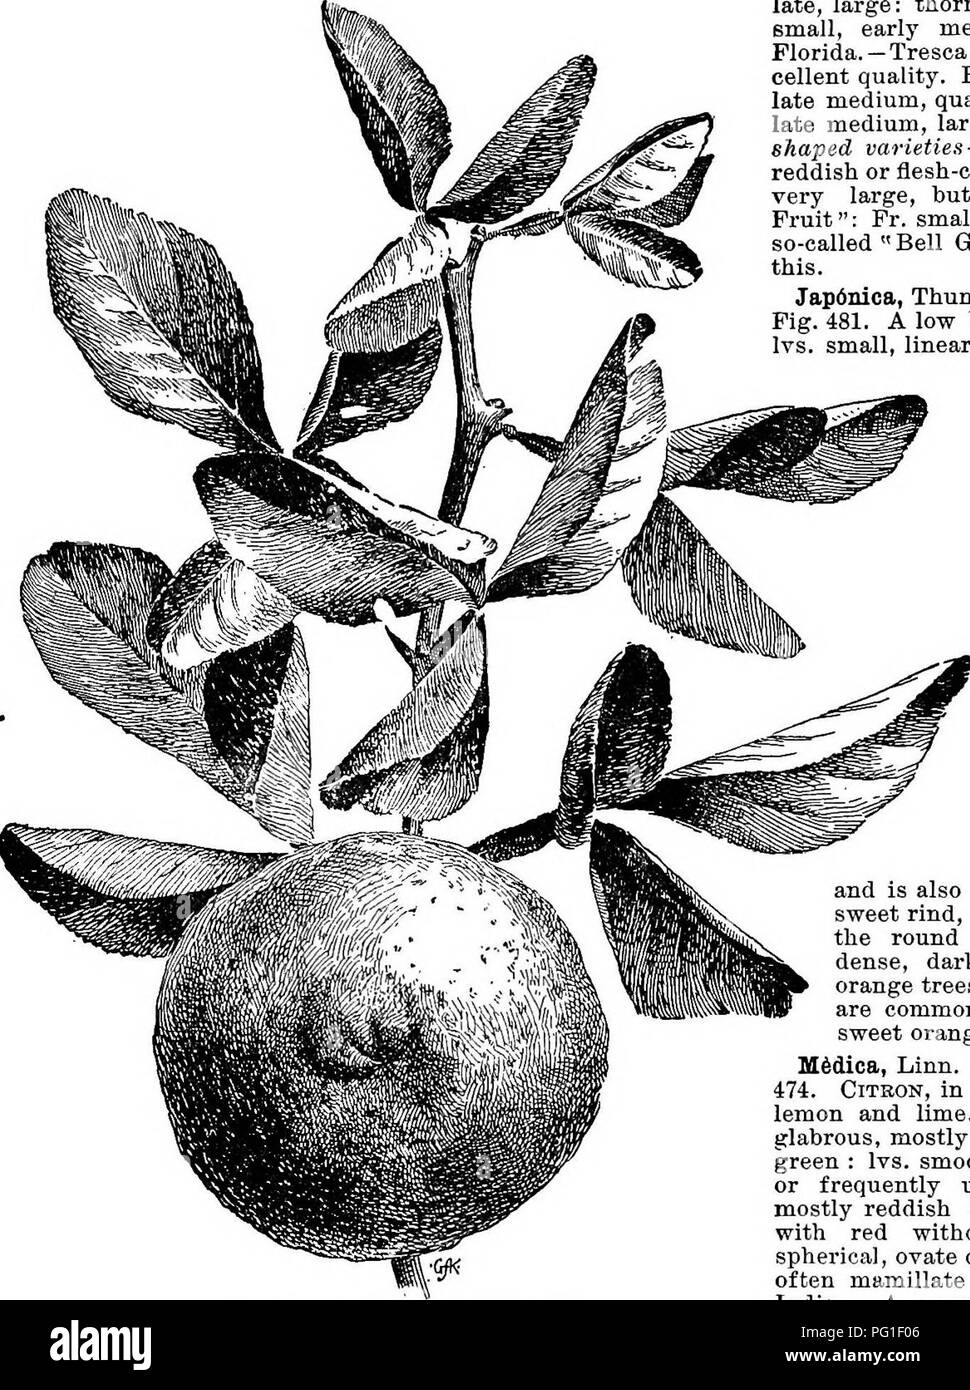 . Cyclopedia of American horticulture, comprising suggestions for cultivation of horticultural plants, descriptions of the species of fruits, vegetables, flowers, and ornamental plants sold in the United States and Canada, together with geographical and biographical sketches. Gardening. 324 CITRUS CITKUS budded on the hardy trifoliata orange stock.—Tan- gerine : Fr. very early, light orange,- medivuu size. Foreign. Decnmilna, Linn. (C. Pomel&amp;nus, Hort.). Pomelo, PuMELO, Shaddock,Gbape-feuit, Pompelmos, etc. Tree. 479. Citrus trifoliata. Natural size. small, 25-30 feet high: young shoots sl Stock Photo